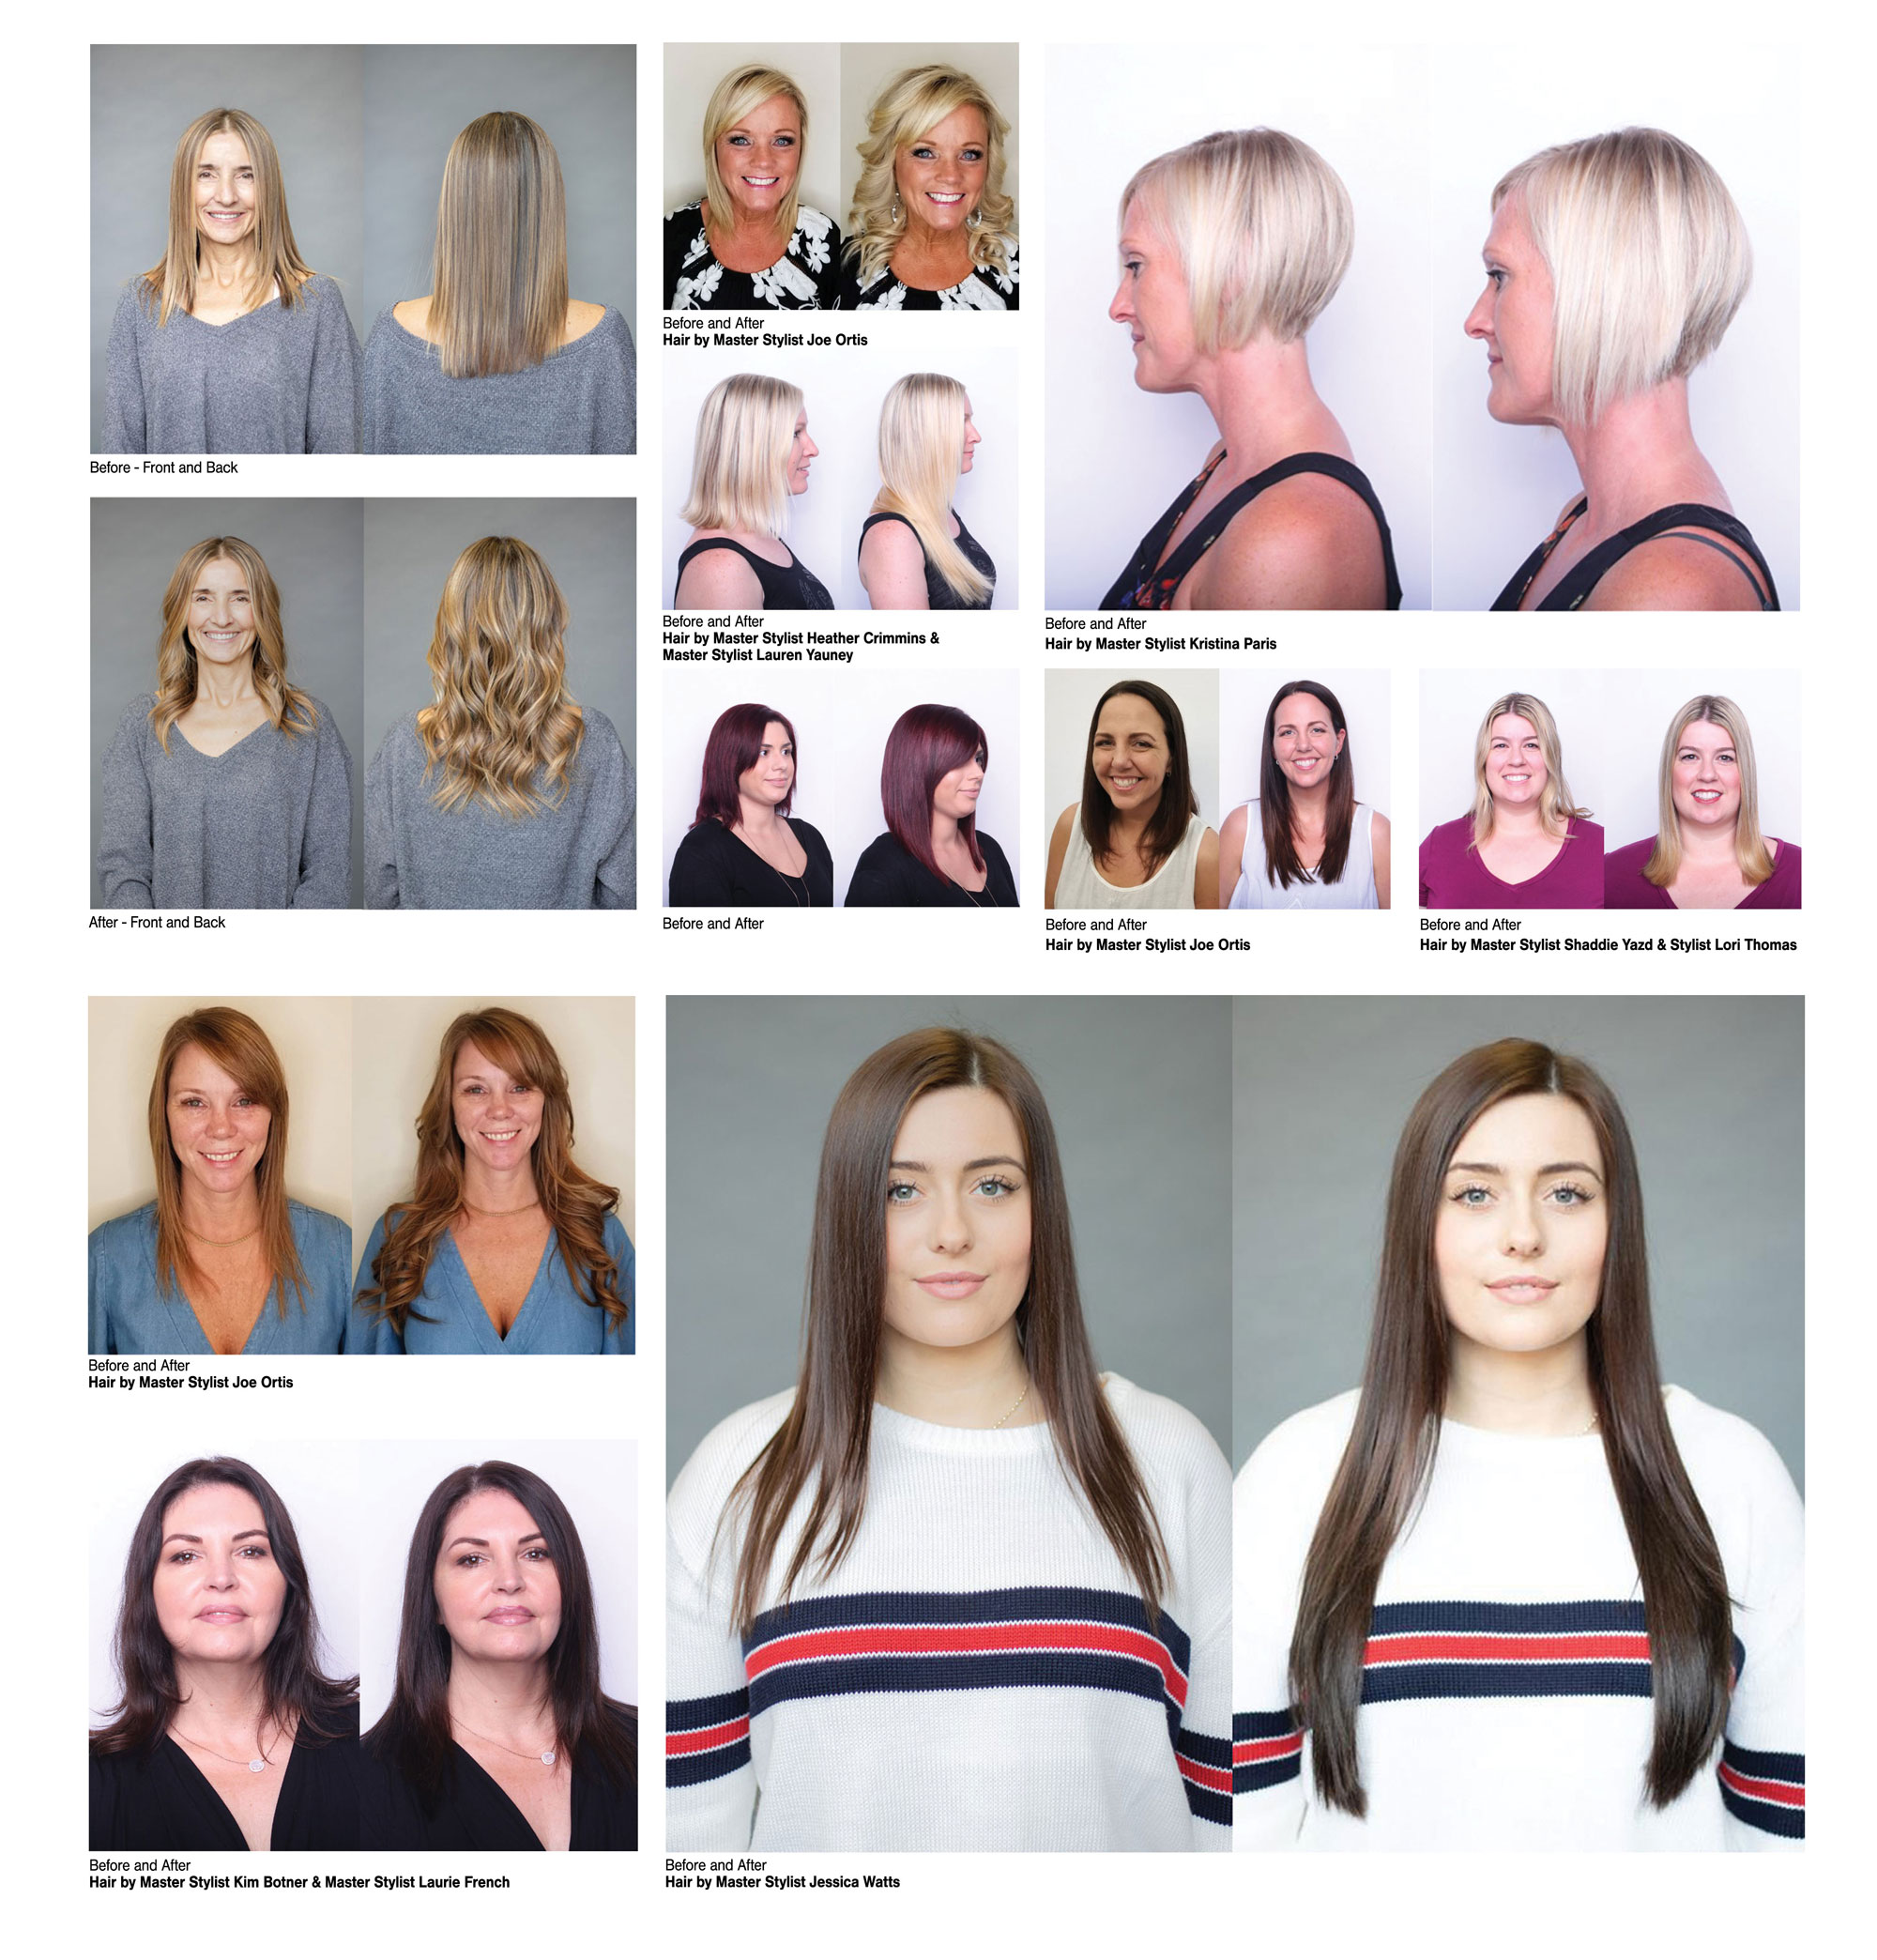 Dosha Salon Spa - VoMor™ Hair Extensions See Our Work